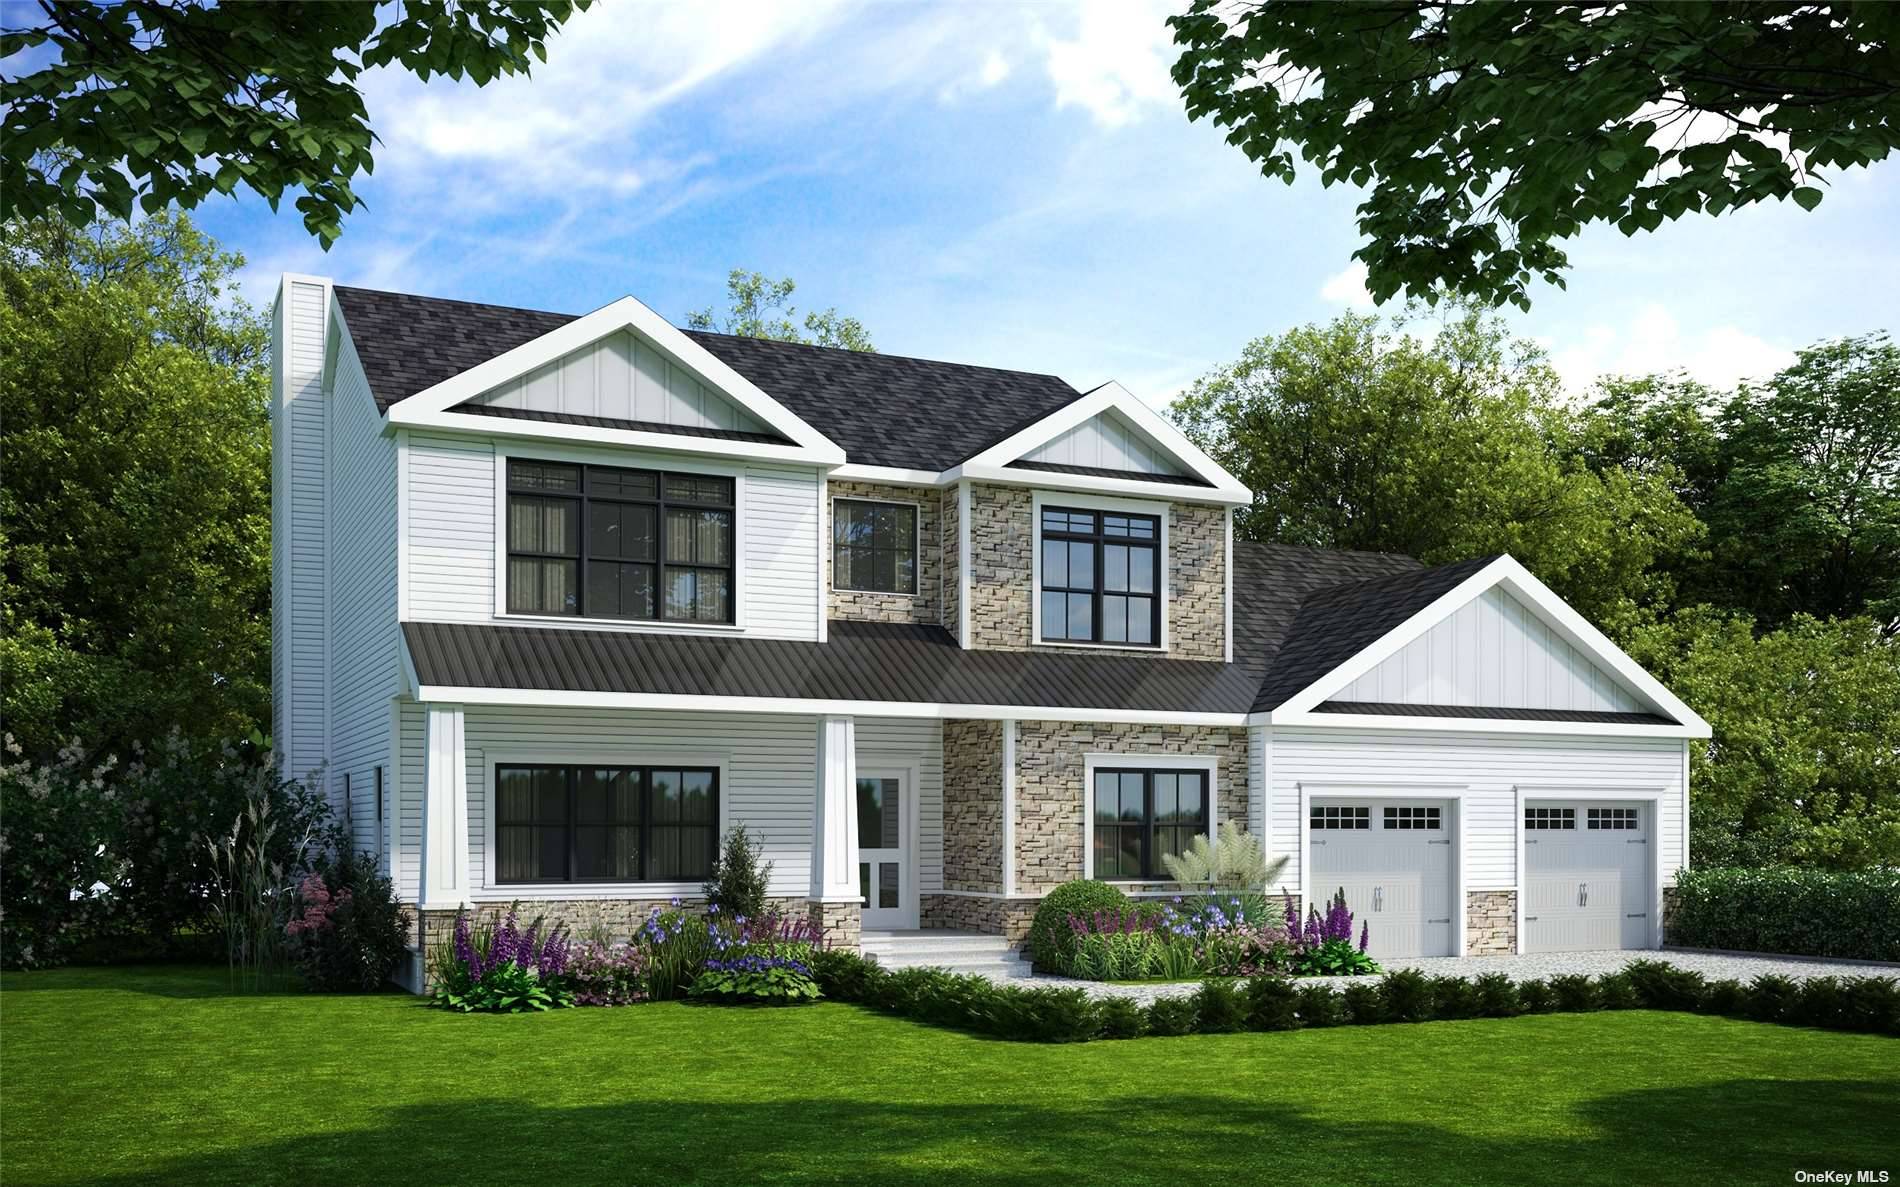 NEW CONSTRUCTION BUILD YOUR DREAM HOME 4 Different models to choose from starting at 730, 000.